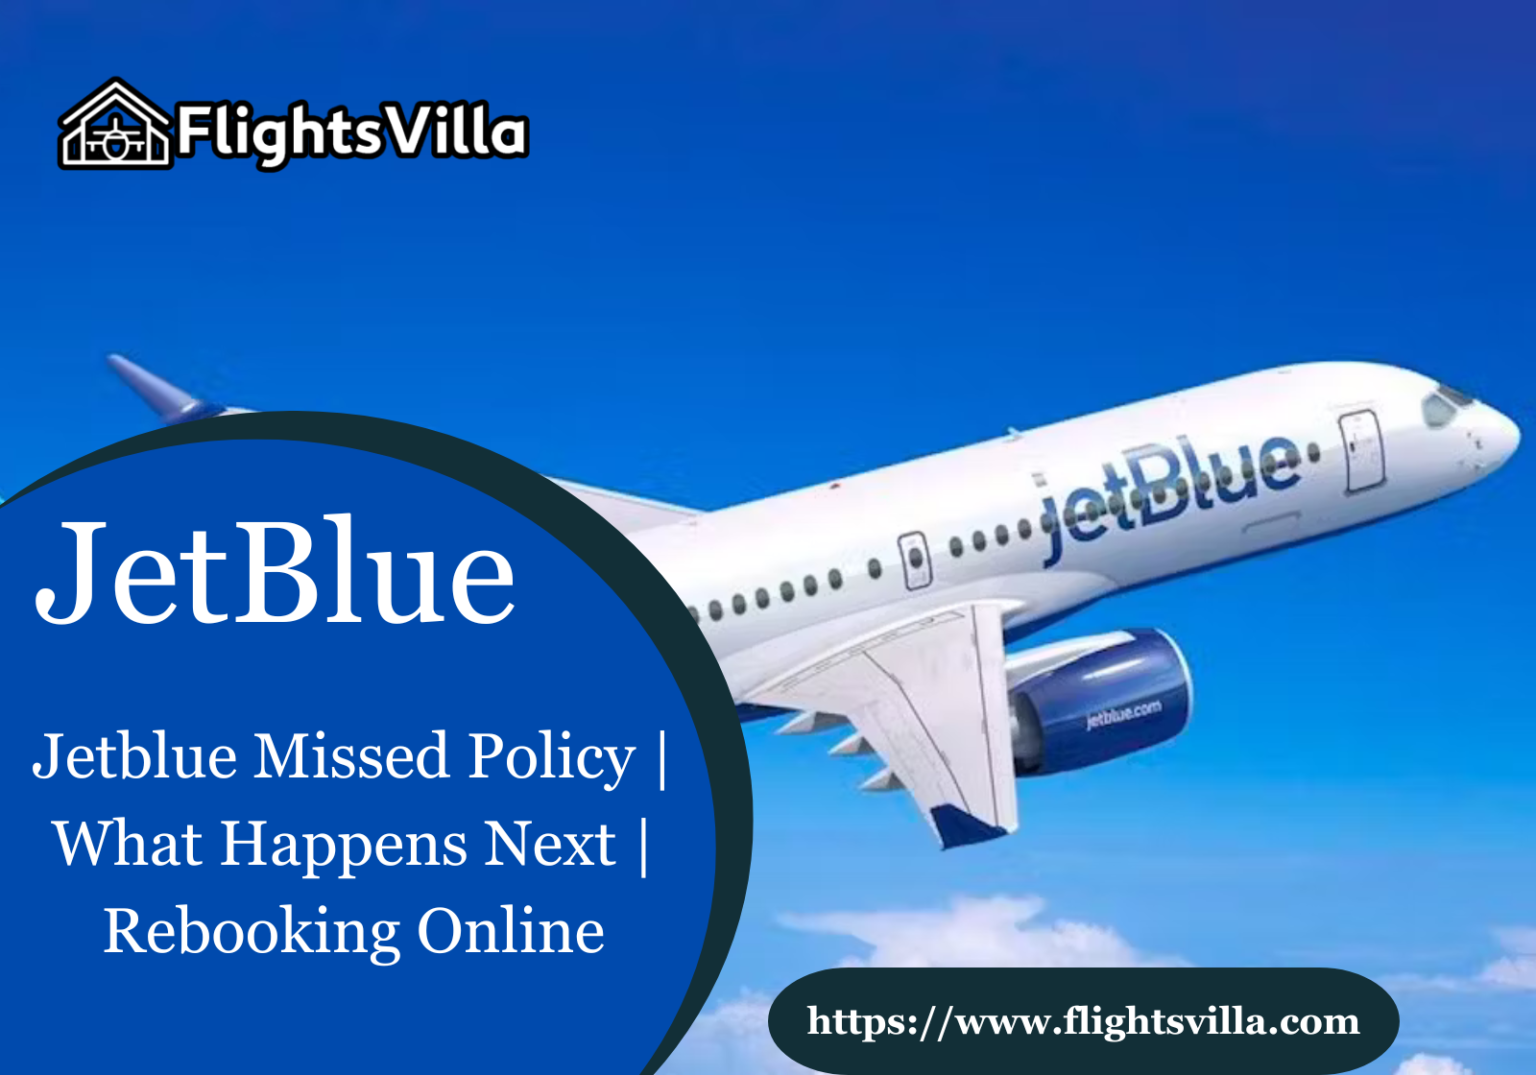 Jetblue Missed Policy